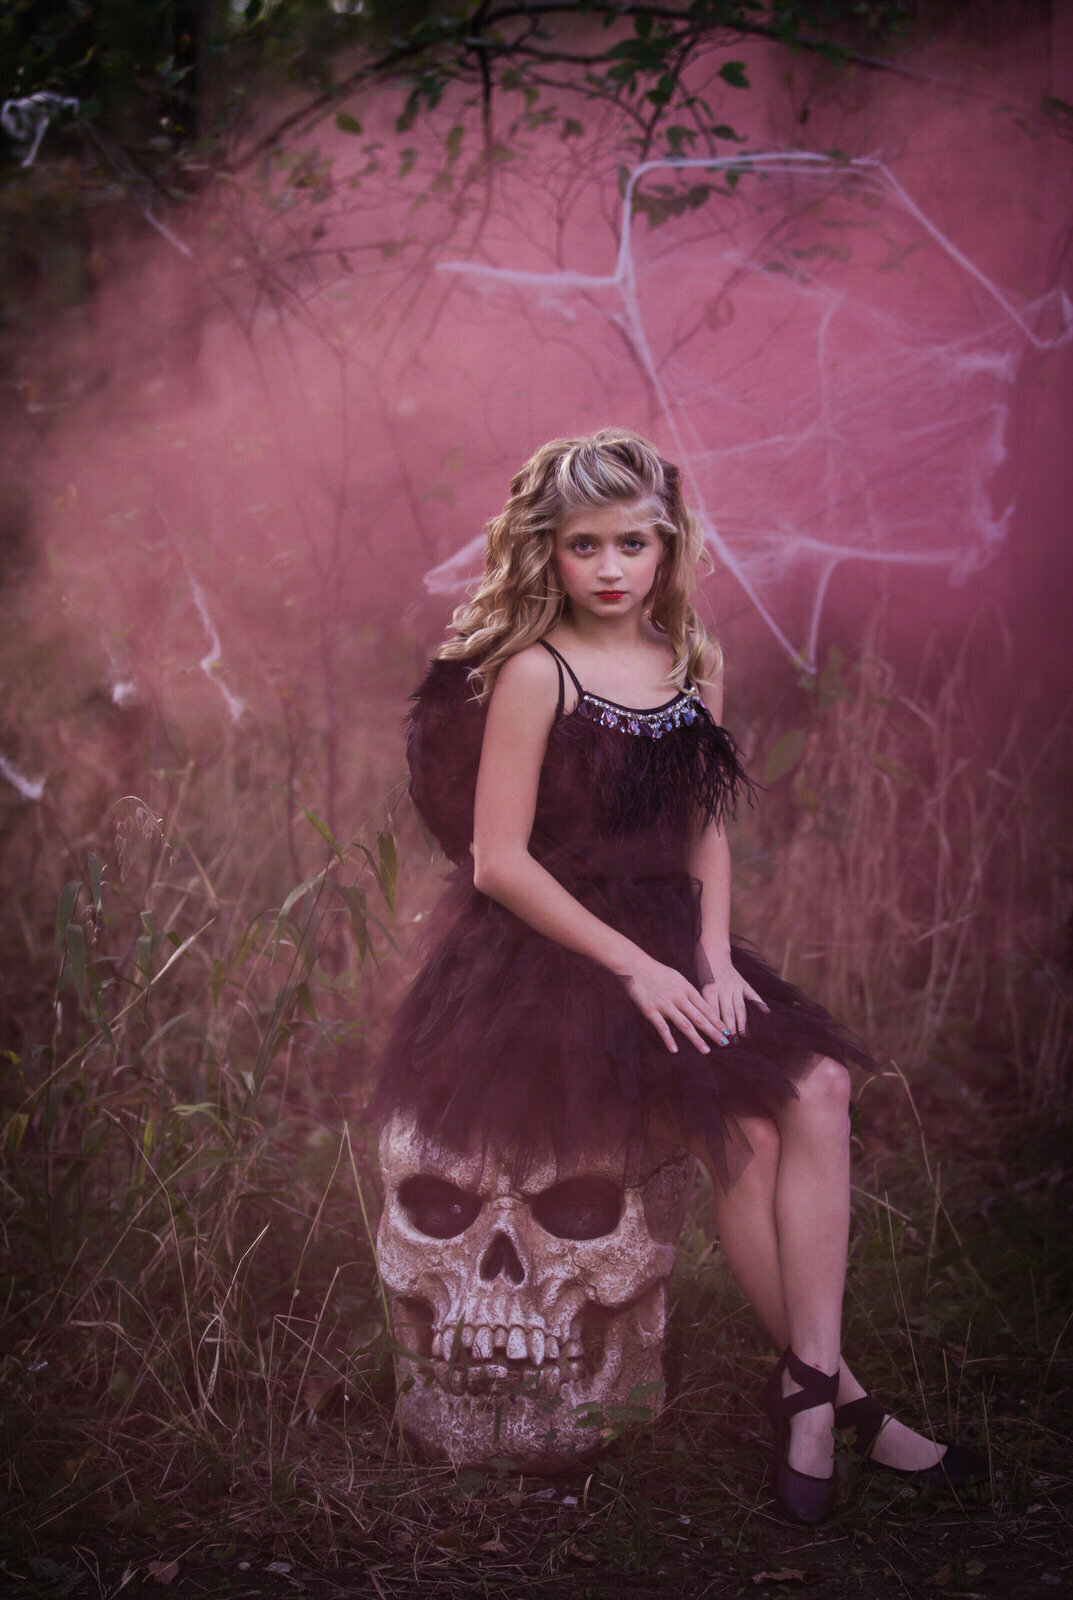 hirl-in-couture-sitting-on-skull-with-pink-smoke